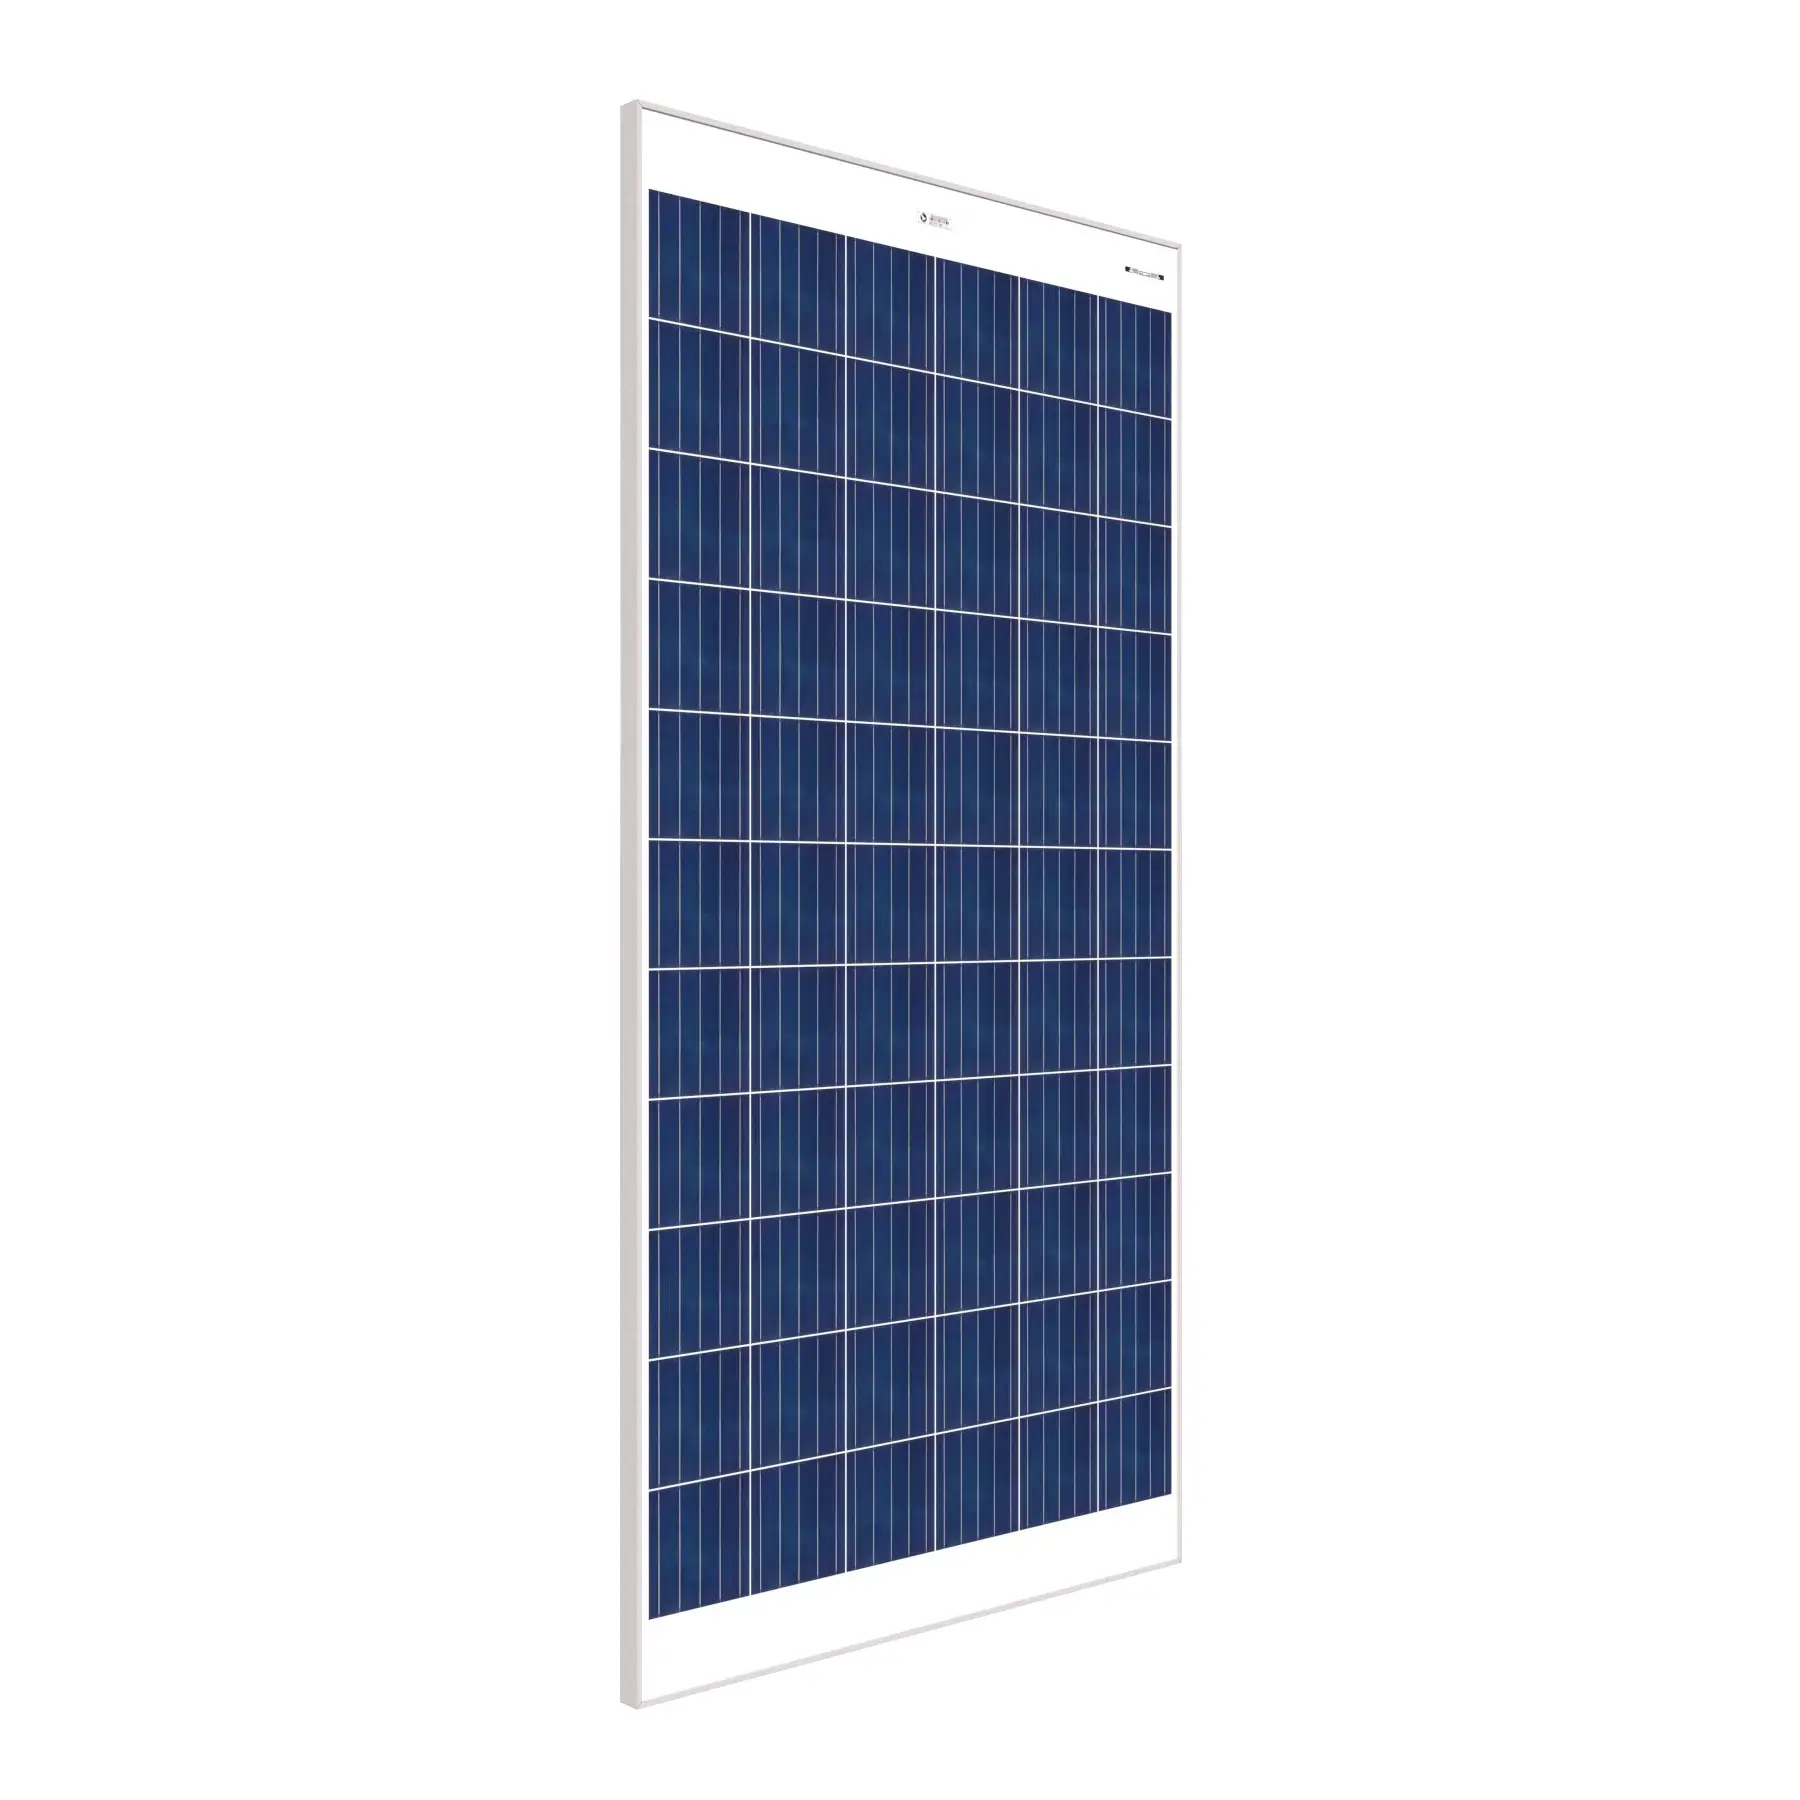 Best Selling 300W Poly Crystalline Solar Panel available Dimension 1960x990x35/40 mm Maximum System Voltage 1000/1500 V DC